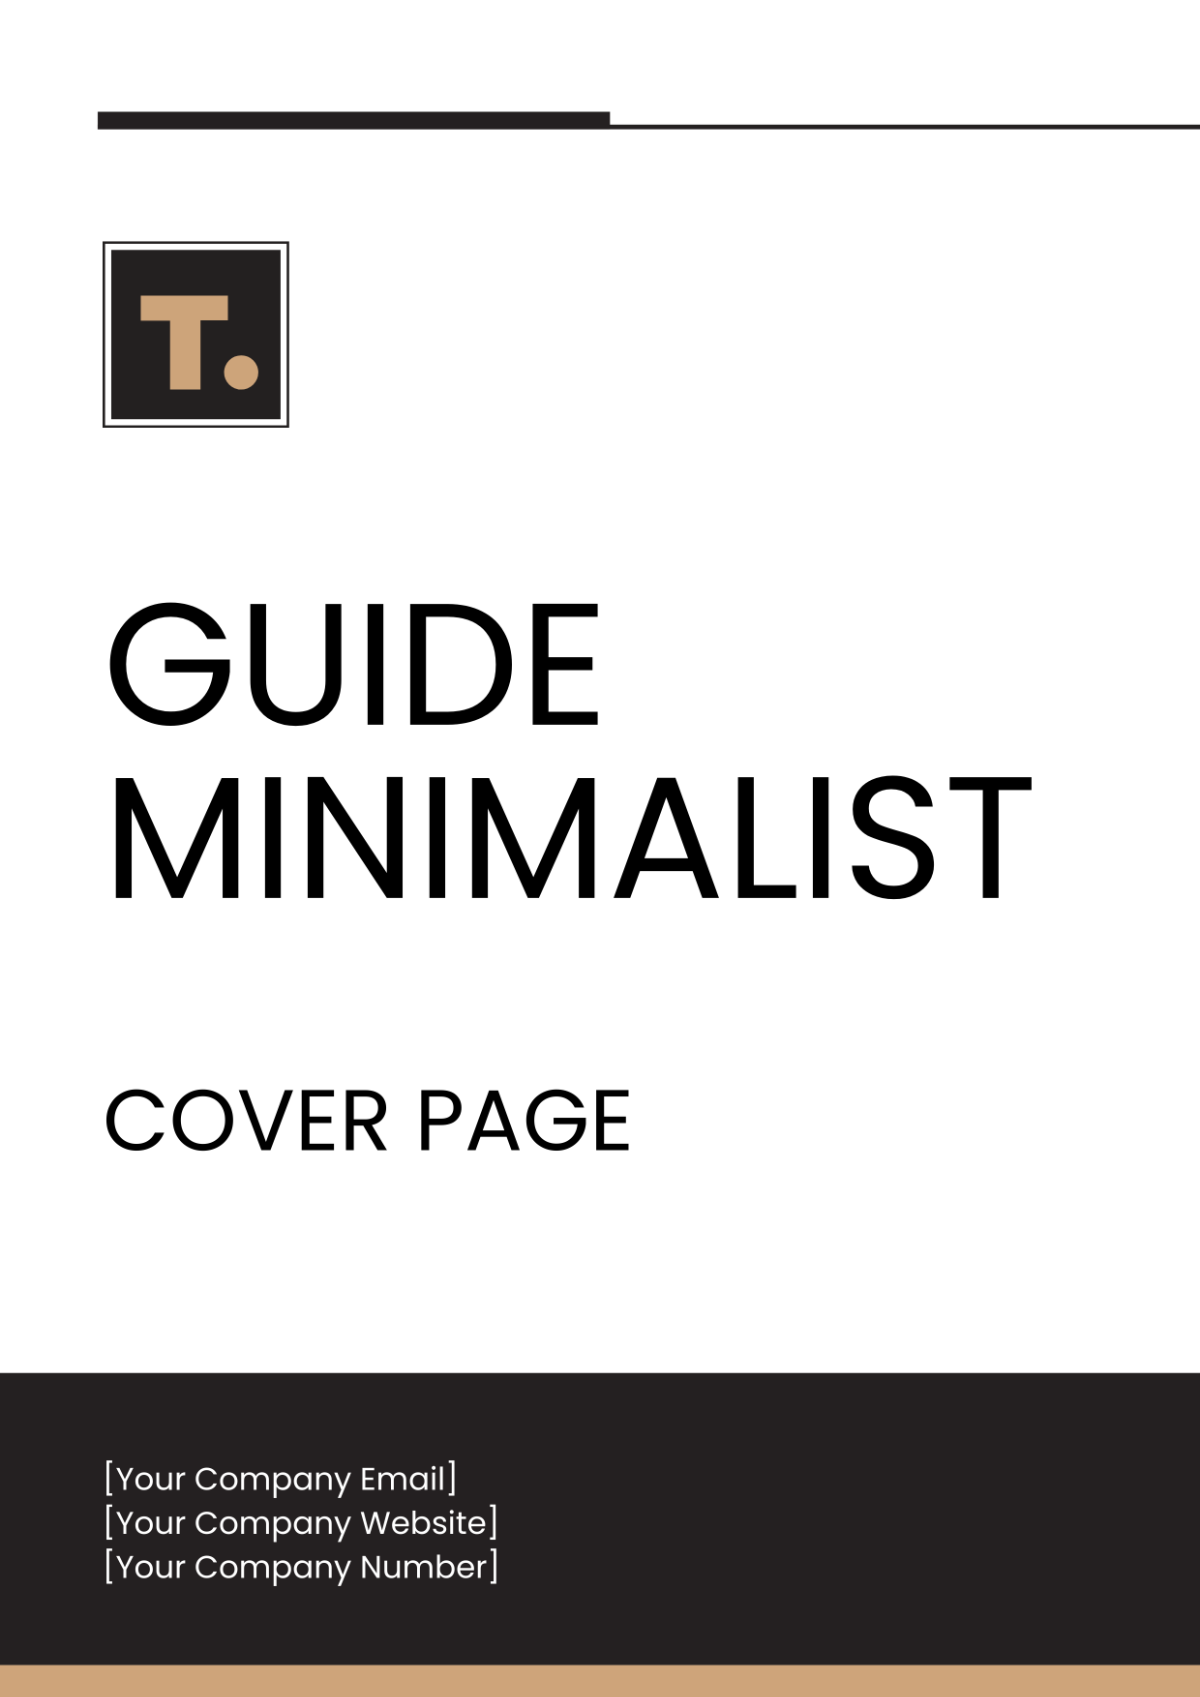 Guide Minimalist Cover Page